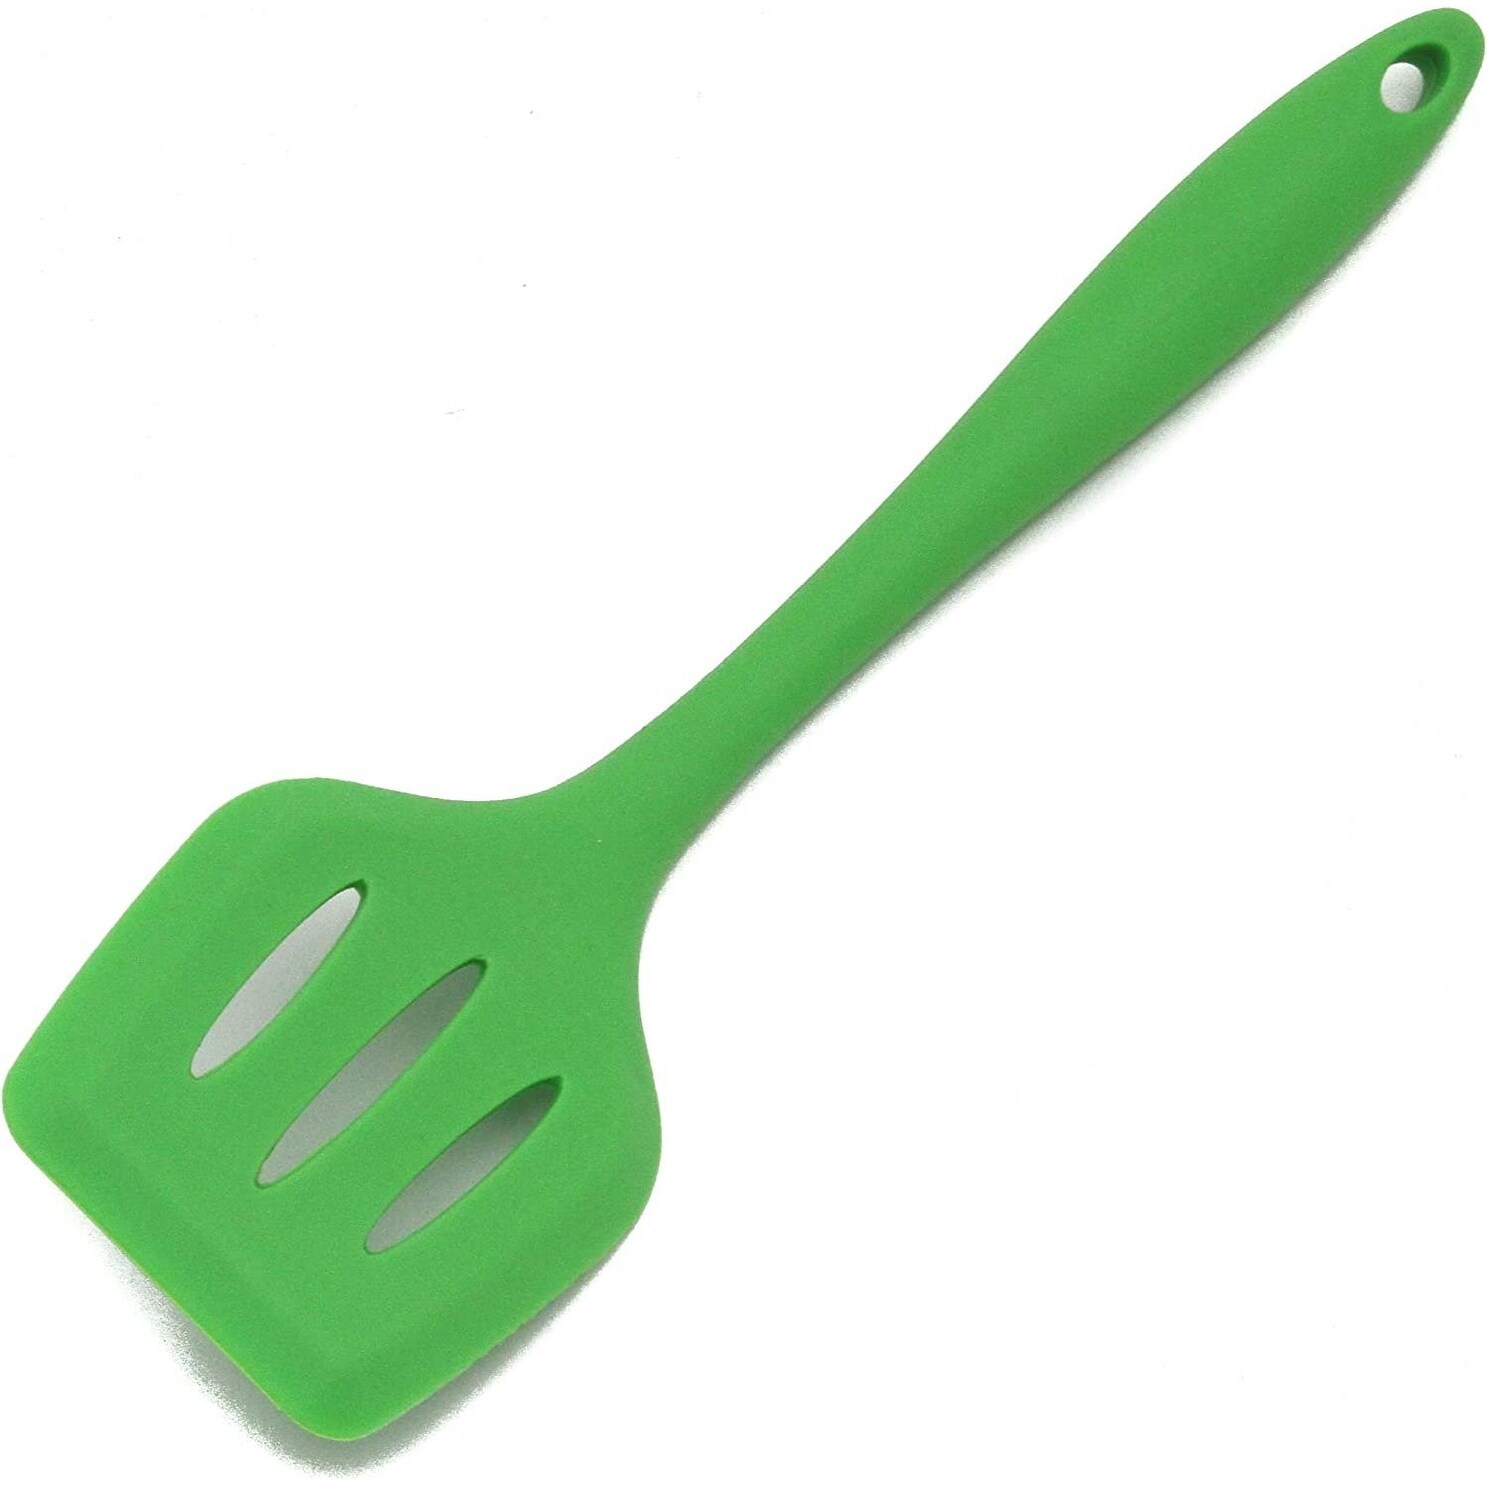 Chef Craft Premium Silicone Cooking Tongs, 12 inch, Green